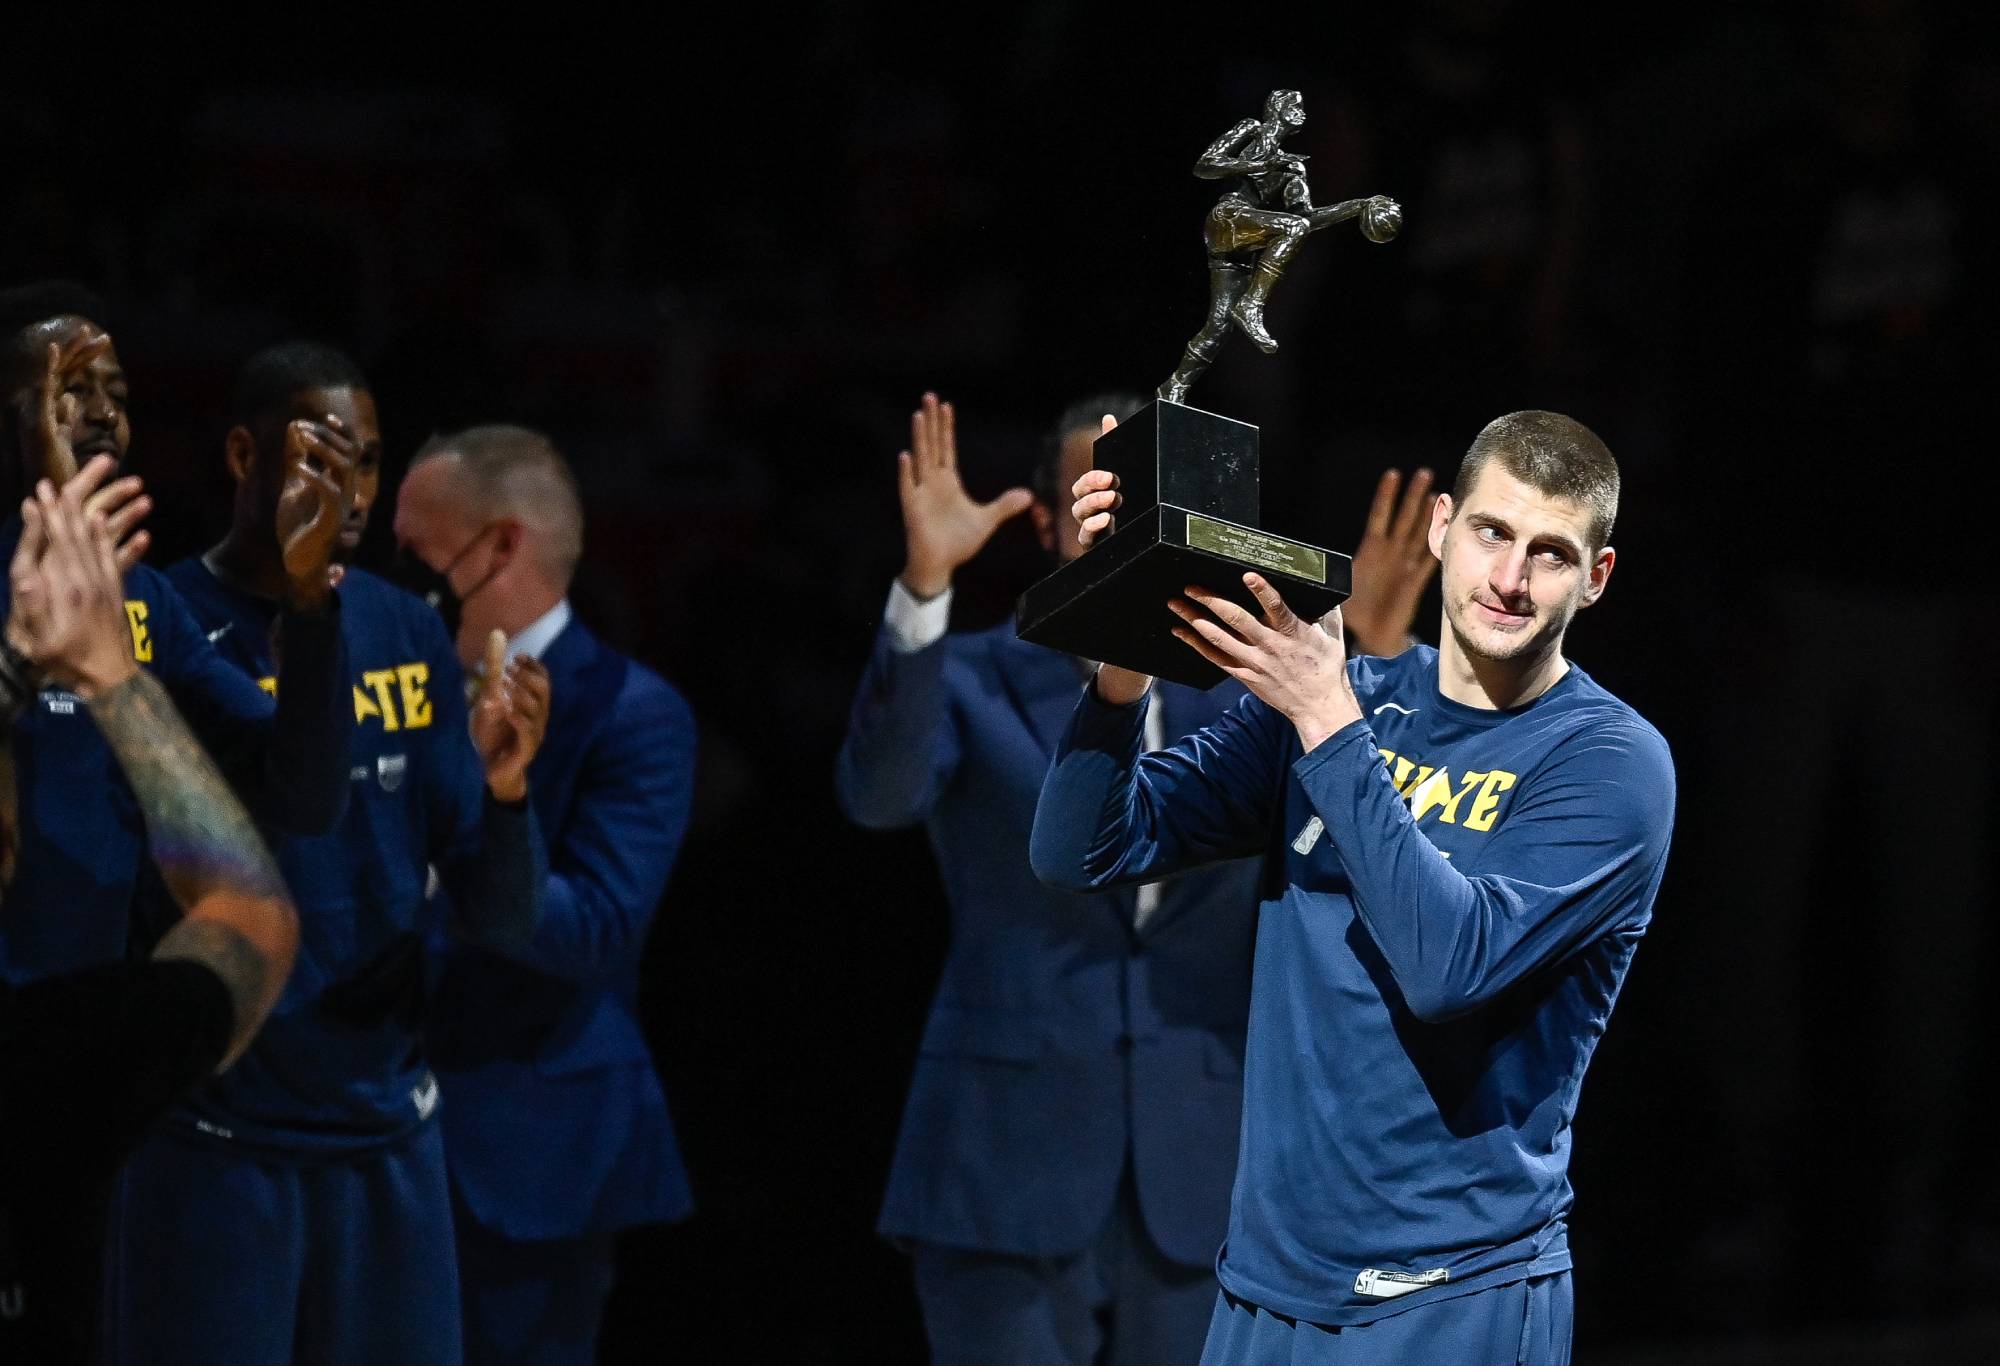 DENVER, CO - JUNE 11: Nikola Jokic #15 of the Denver Nuggets accepts the 2021 NBA MVP award before Game Three of the Western Conference second-round playoff series at Ball Arena on June 11, 2021 in Denver, Colorado. NOTE TO USER: User expressly acknowledges and agrees that, by downloading and or using this photograph, User is consenting to the terms and conditions of the Getty Images License Agreement. (Photo by Dustin Bradford/Getty Images)